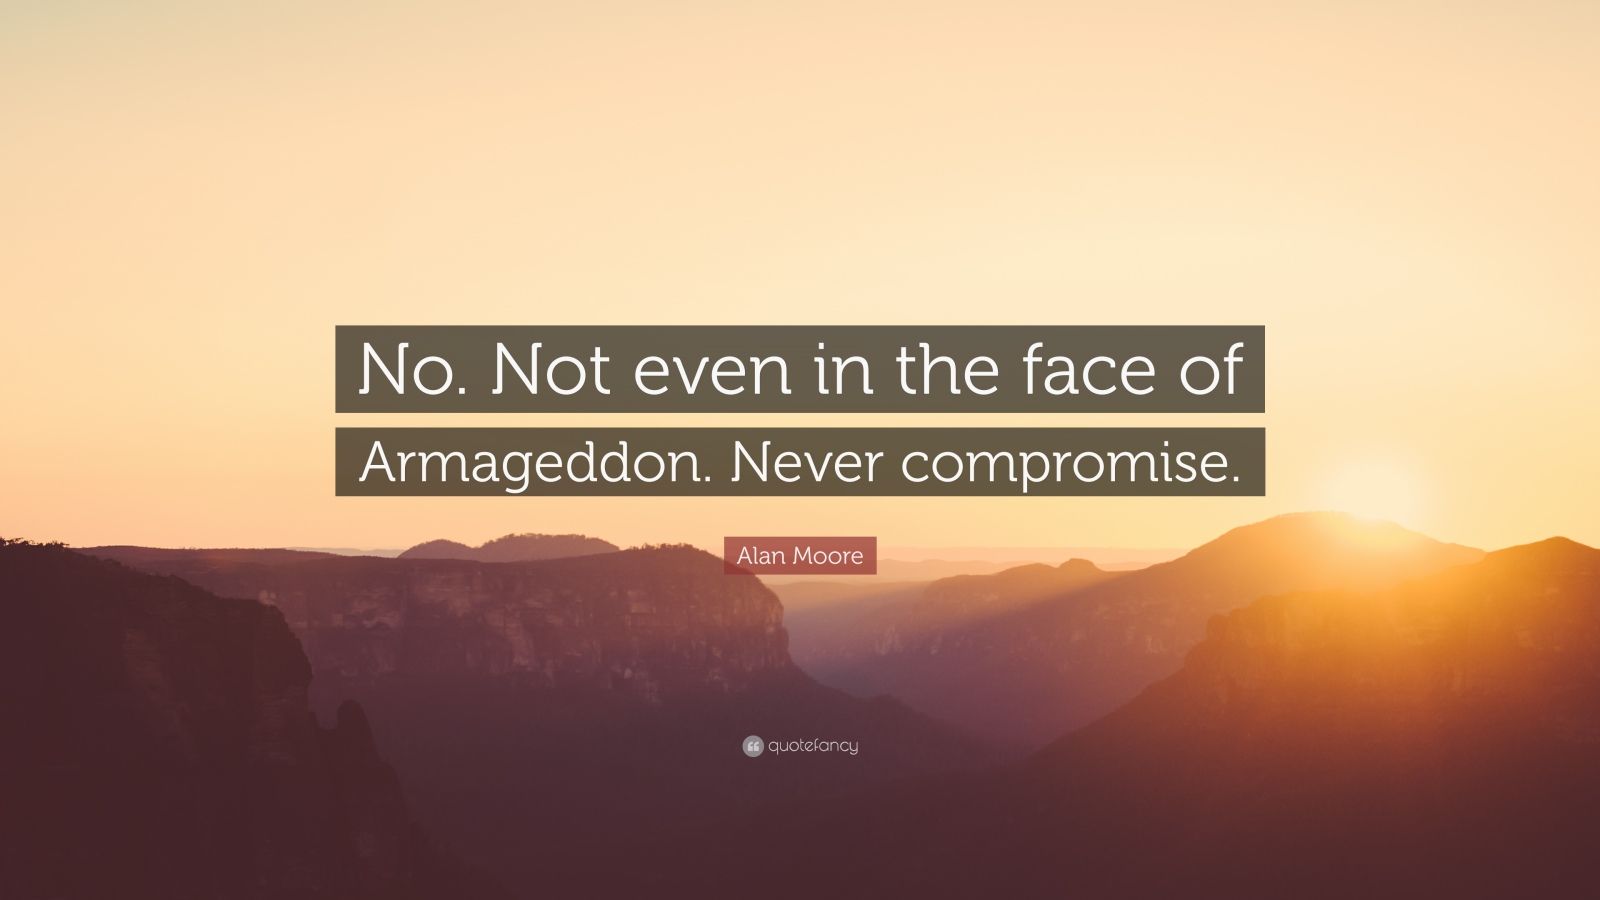 Never compromise. Not even in the face of Armageddon. - Rorschach  (Watchmen) [1280x800] : r/QuotesPorn